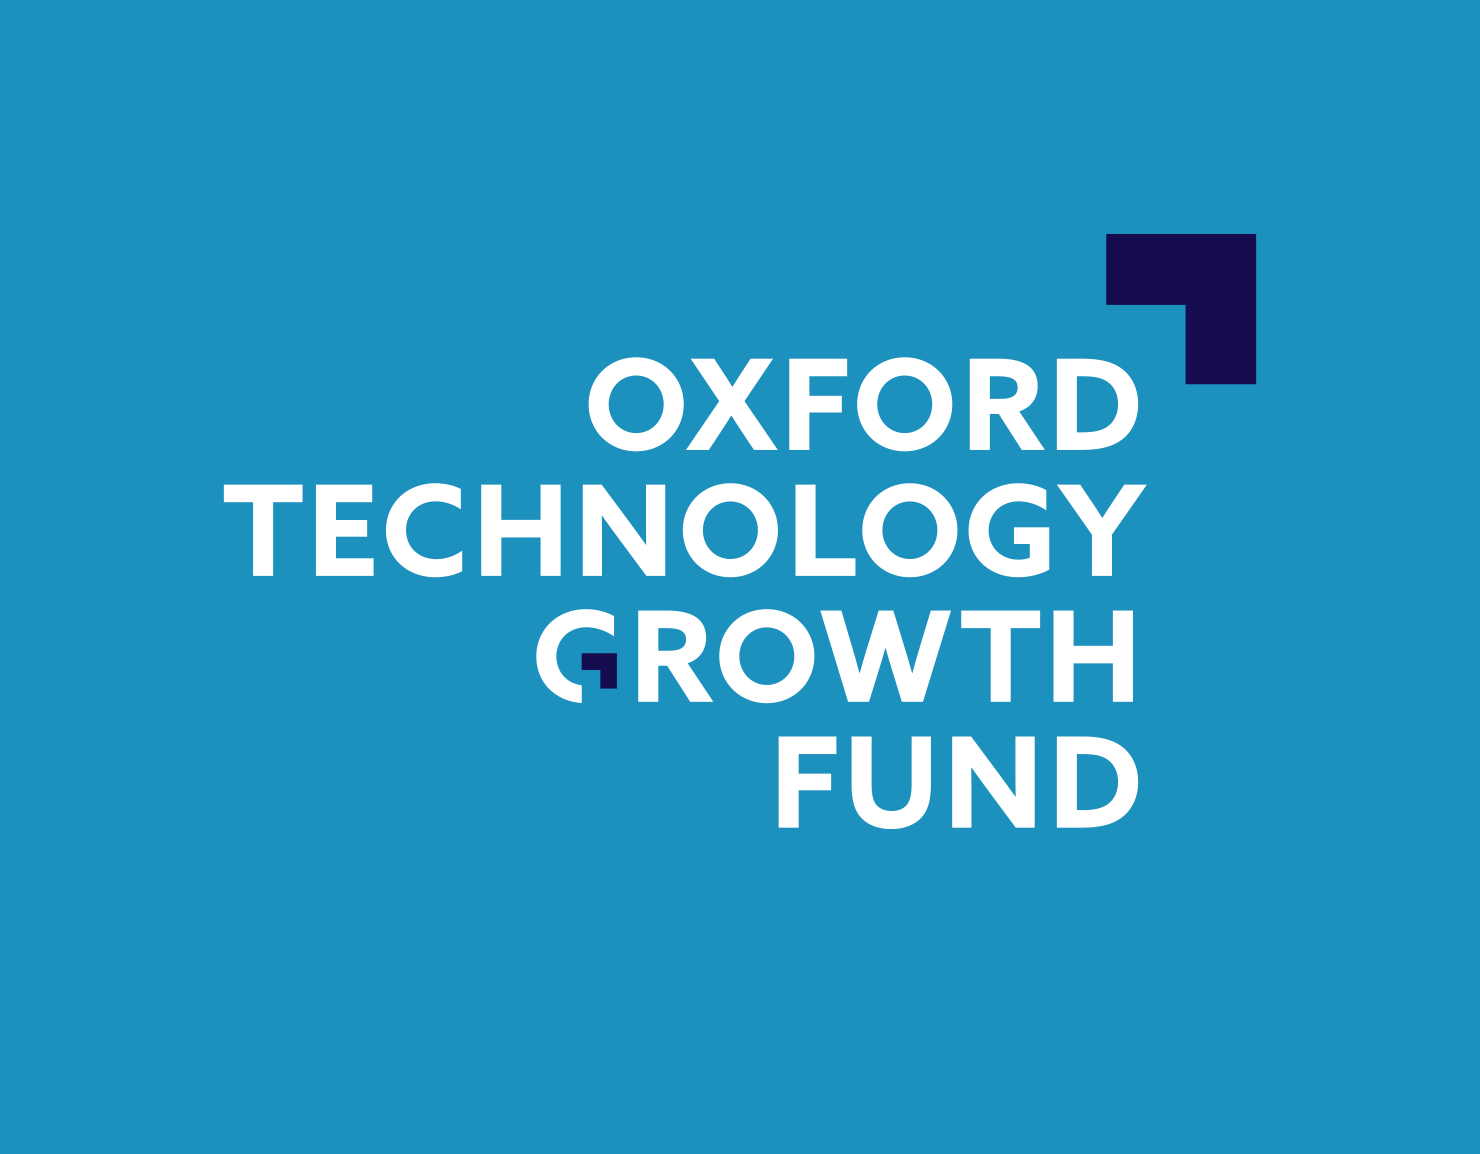 Oxford Technology - Brand, design and web